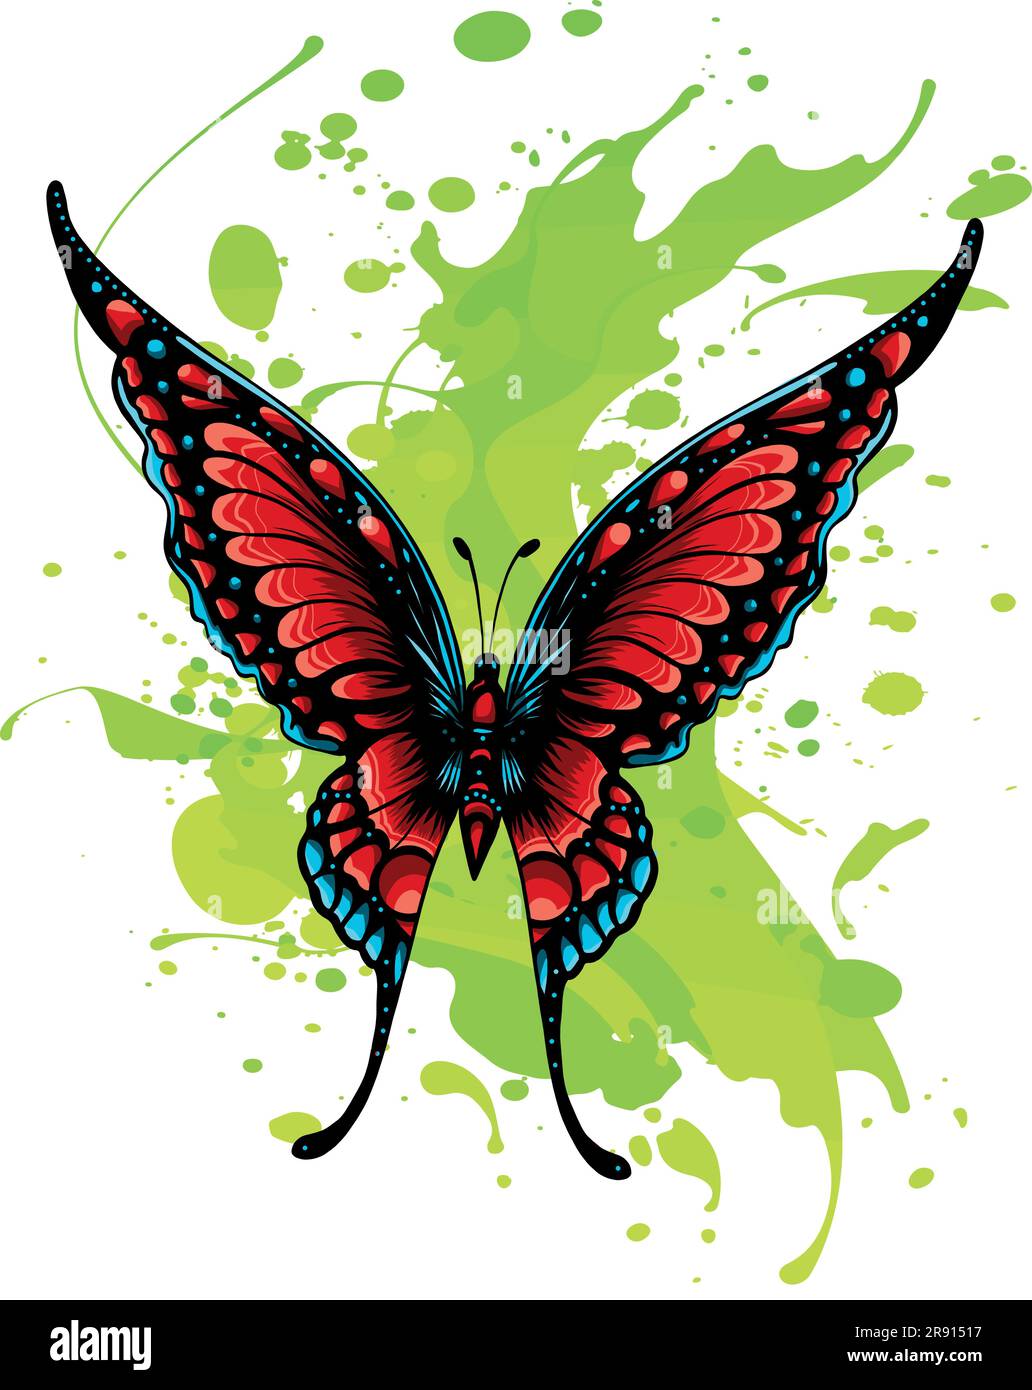 vector illustration of colored butterfly hand draw Stock Vector